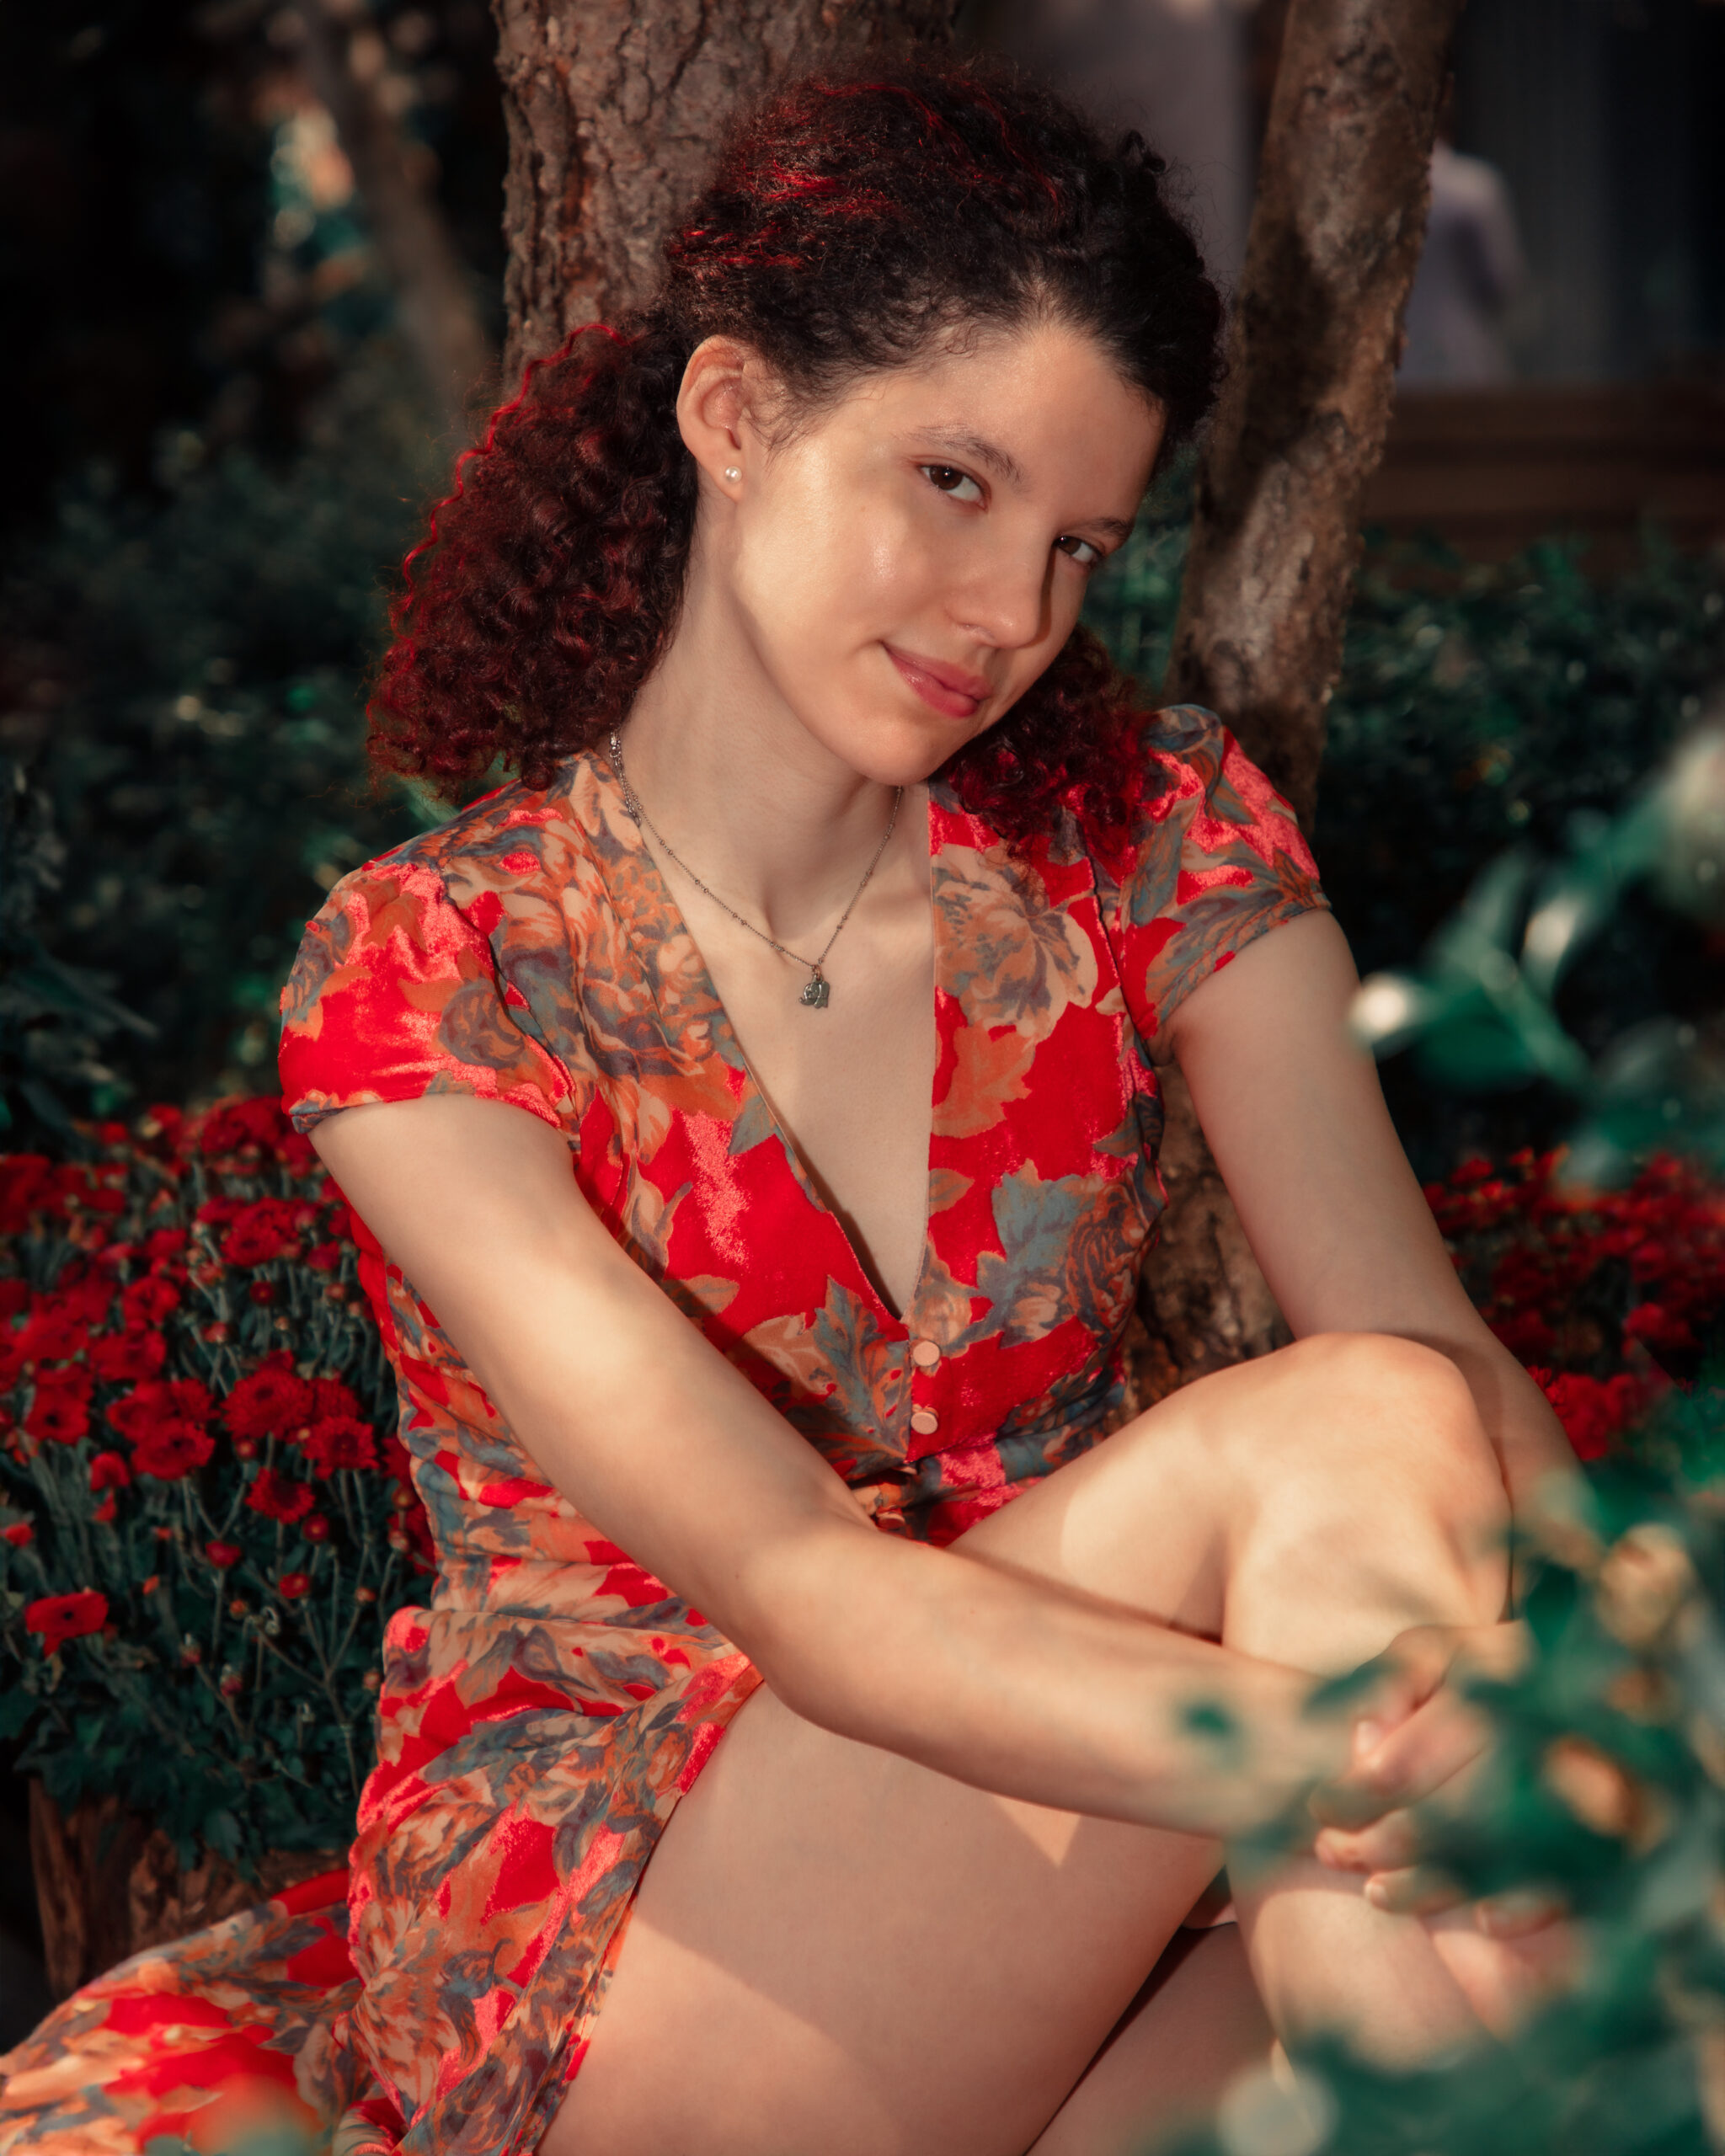 The image is a portrait of a woman sitting with one knee drawn up, leaning against a tree. She has curly brown hair  with red highlights, is smiling slightly, and is looking at the camera. She's wearing a red dress with a floral pattern and a V-neckline. She is wearing a delicate necklace. The environment suggests an outdoor setting with foliage and red flowers in the background. The lighting is warm, enhancing the red and green tones in the scene.